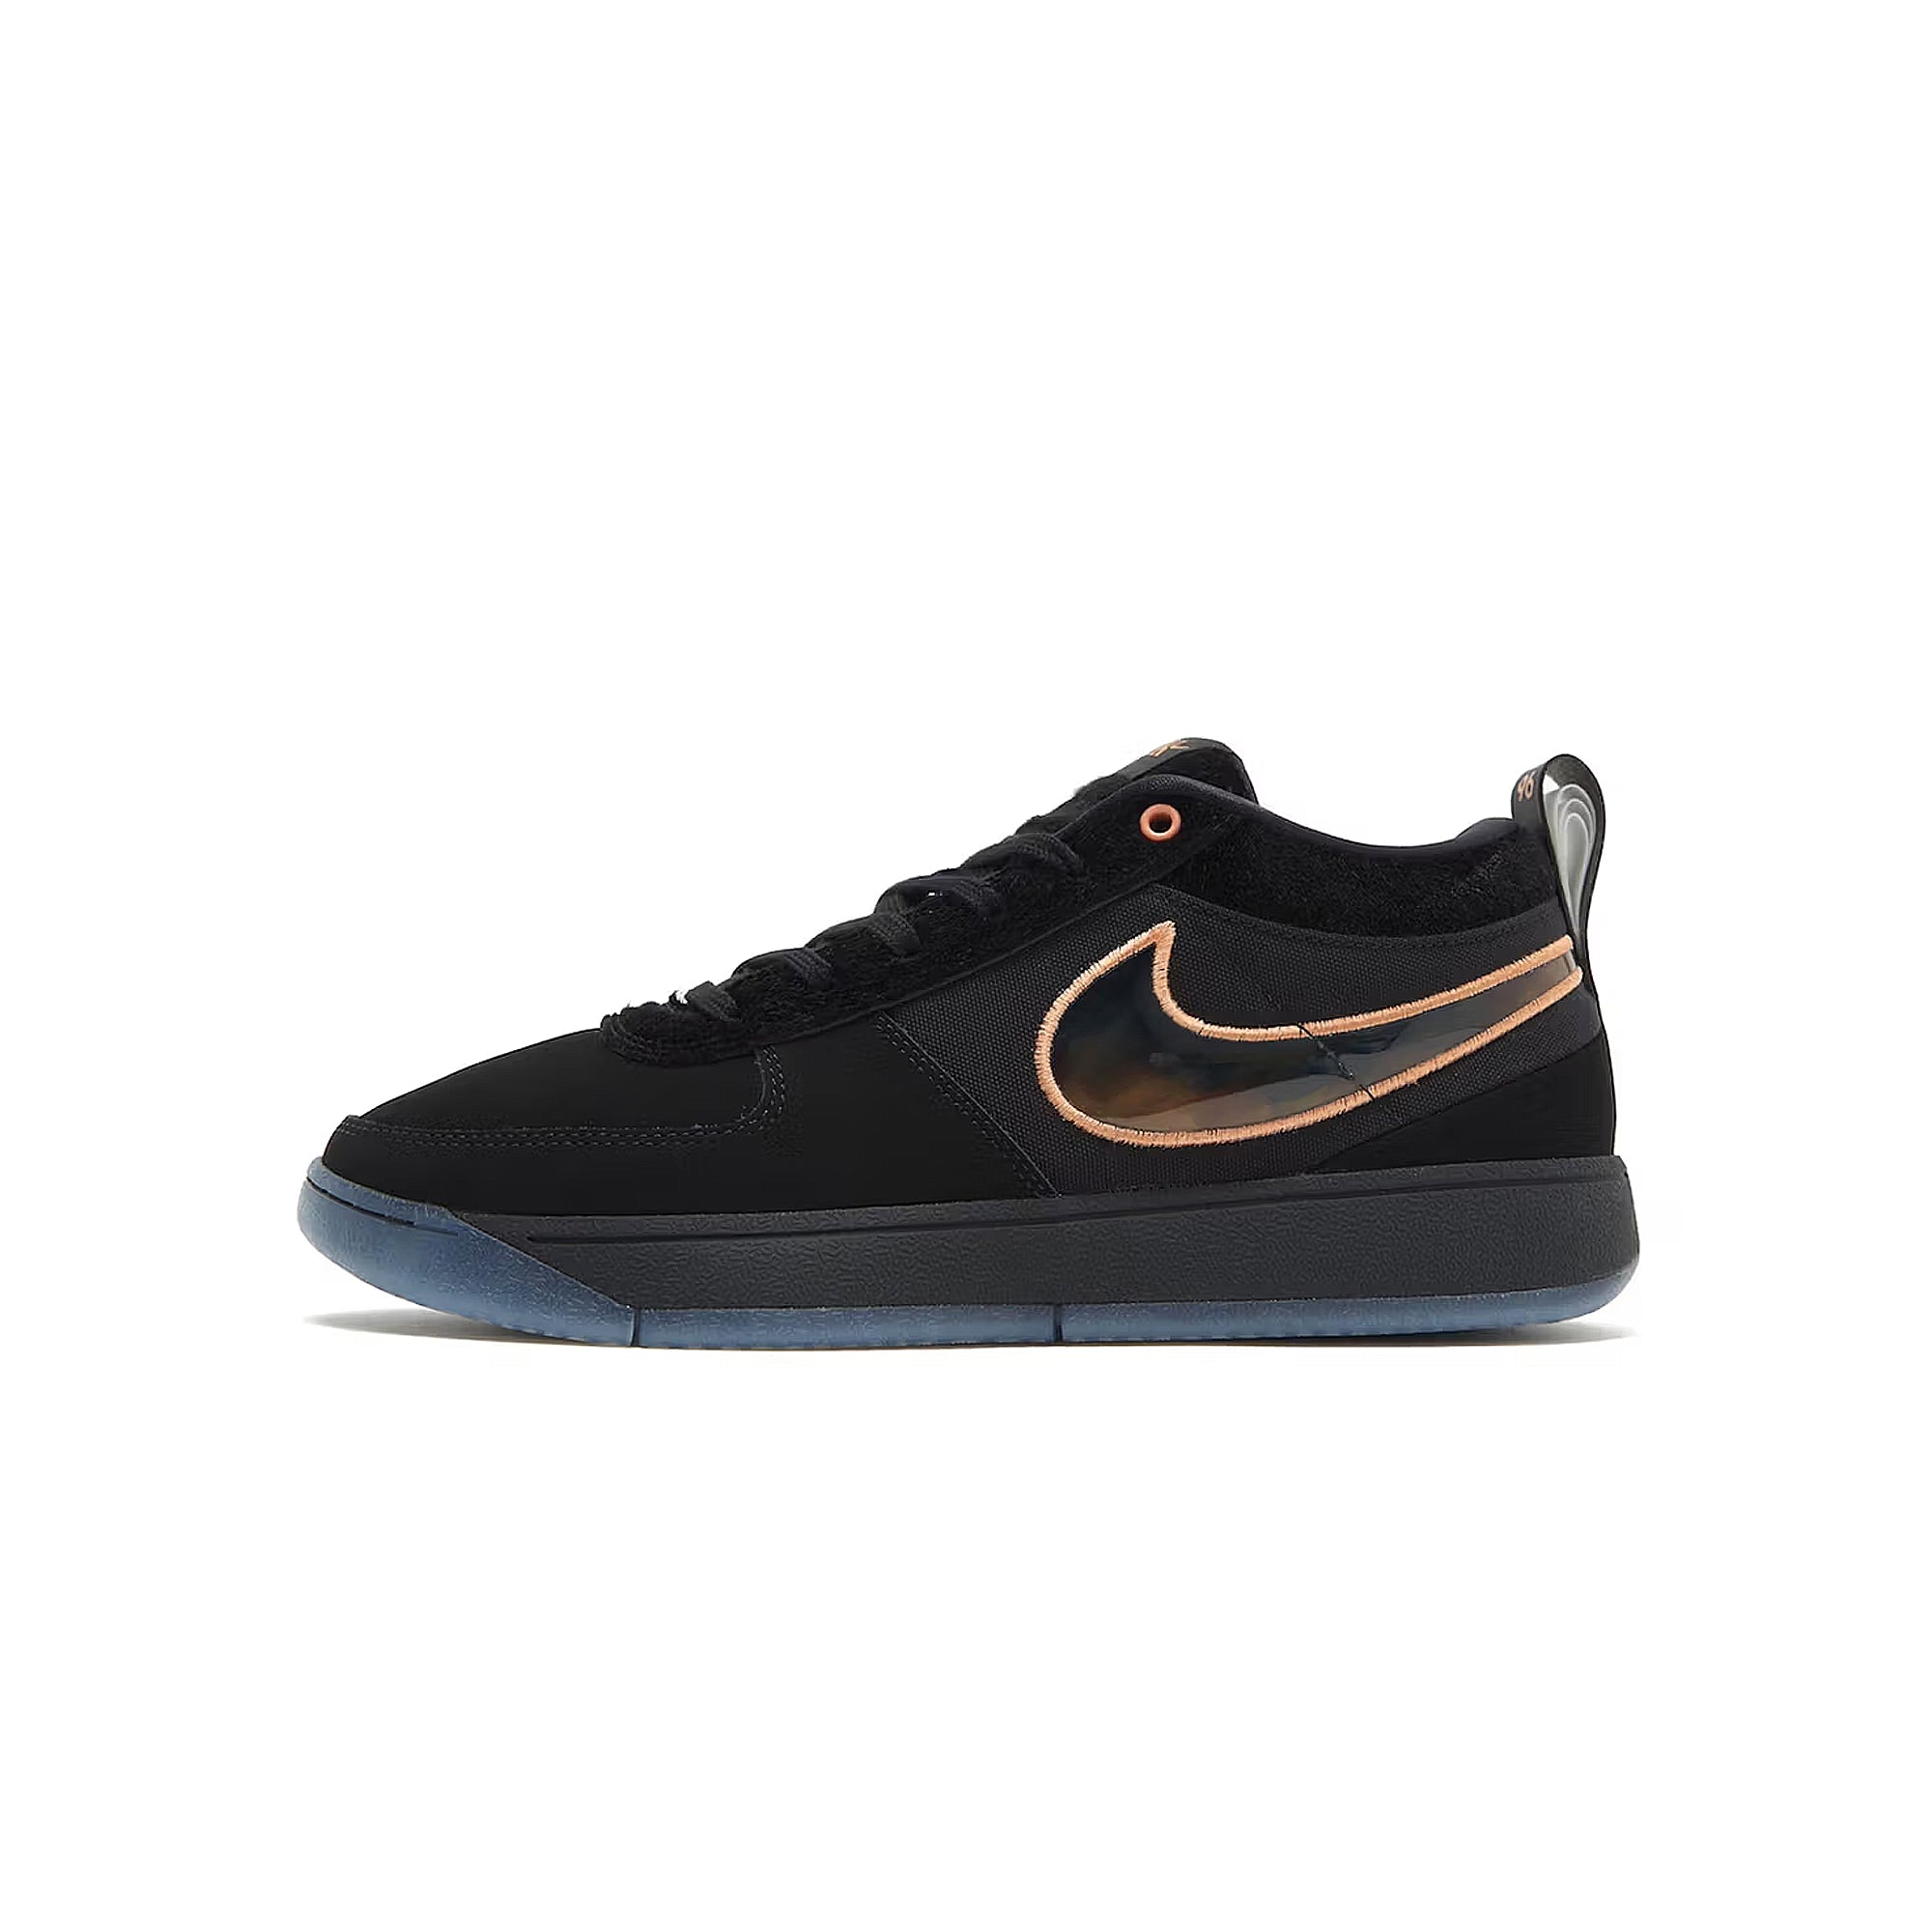 Nike Mens Book 1 Shoes card image